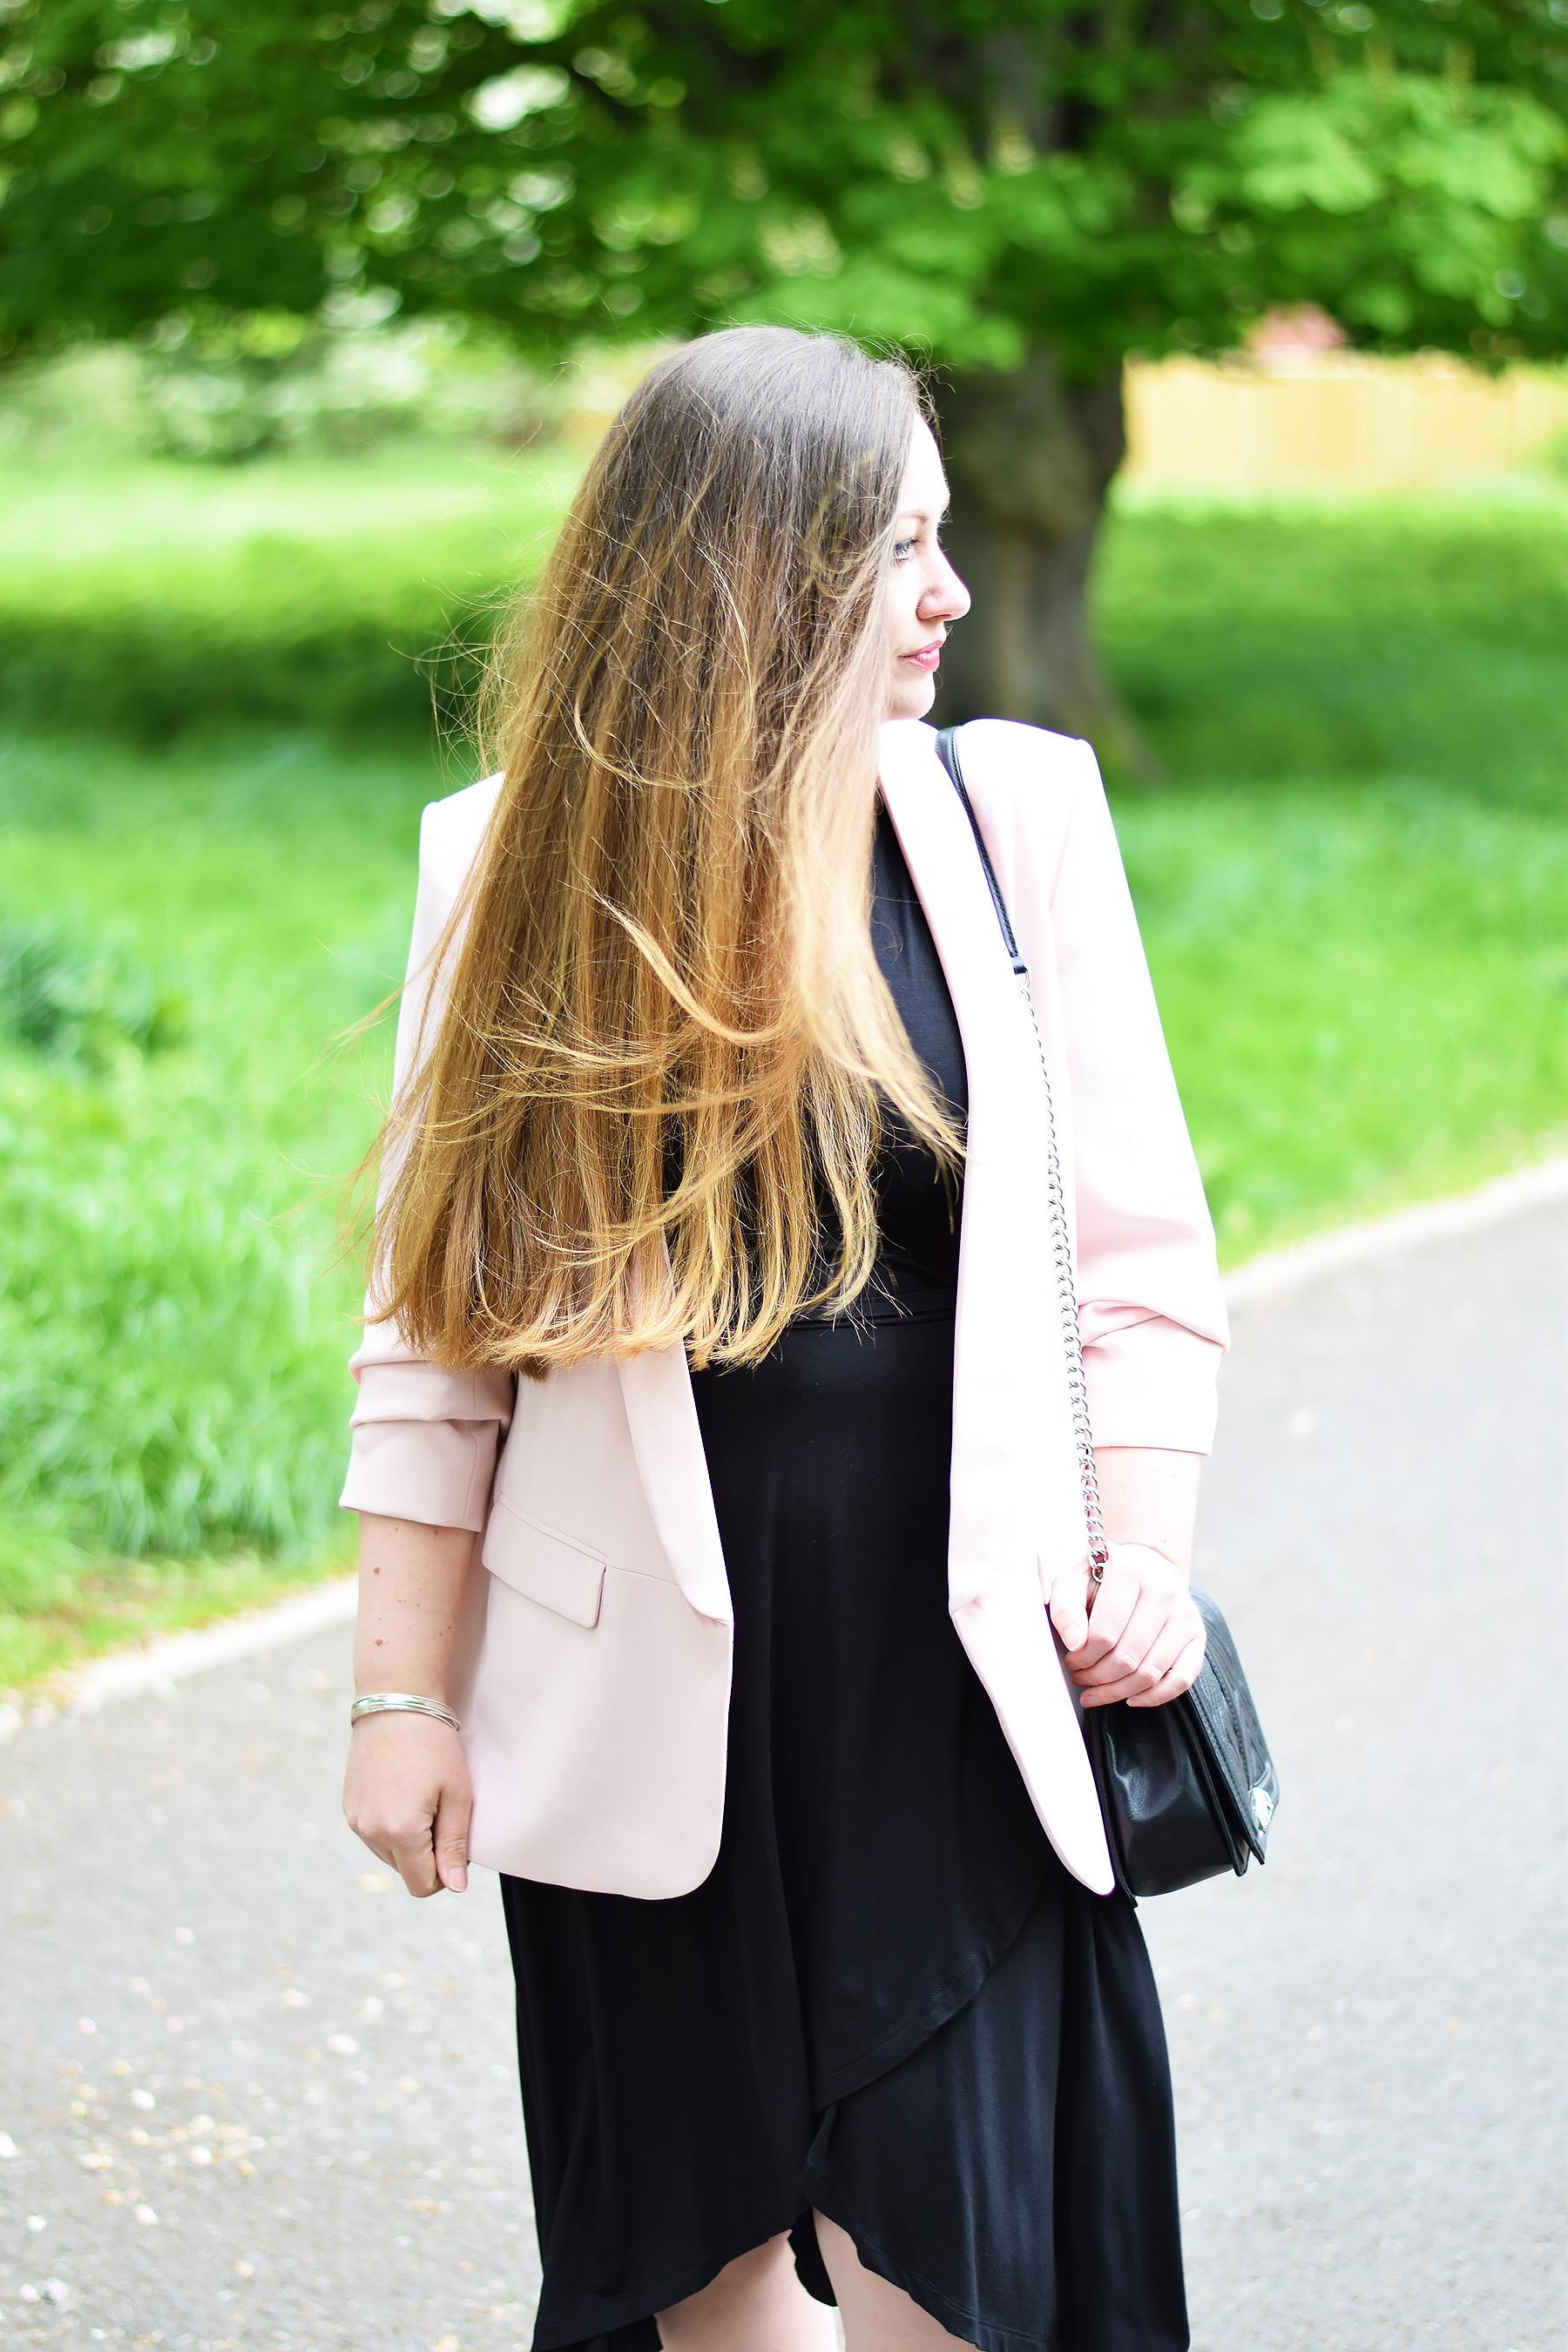 How to wear a pastel pink jacket